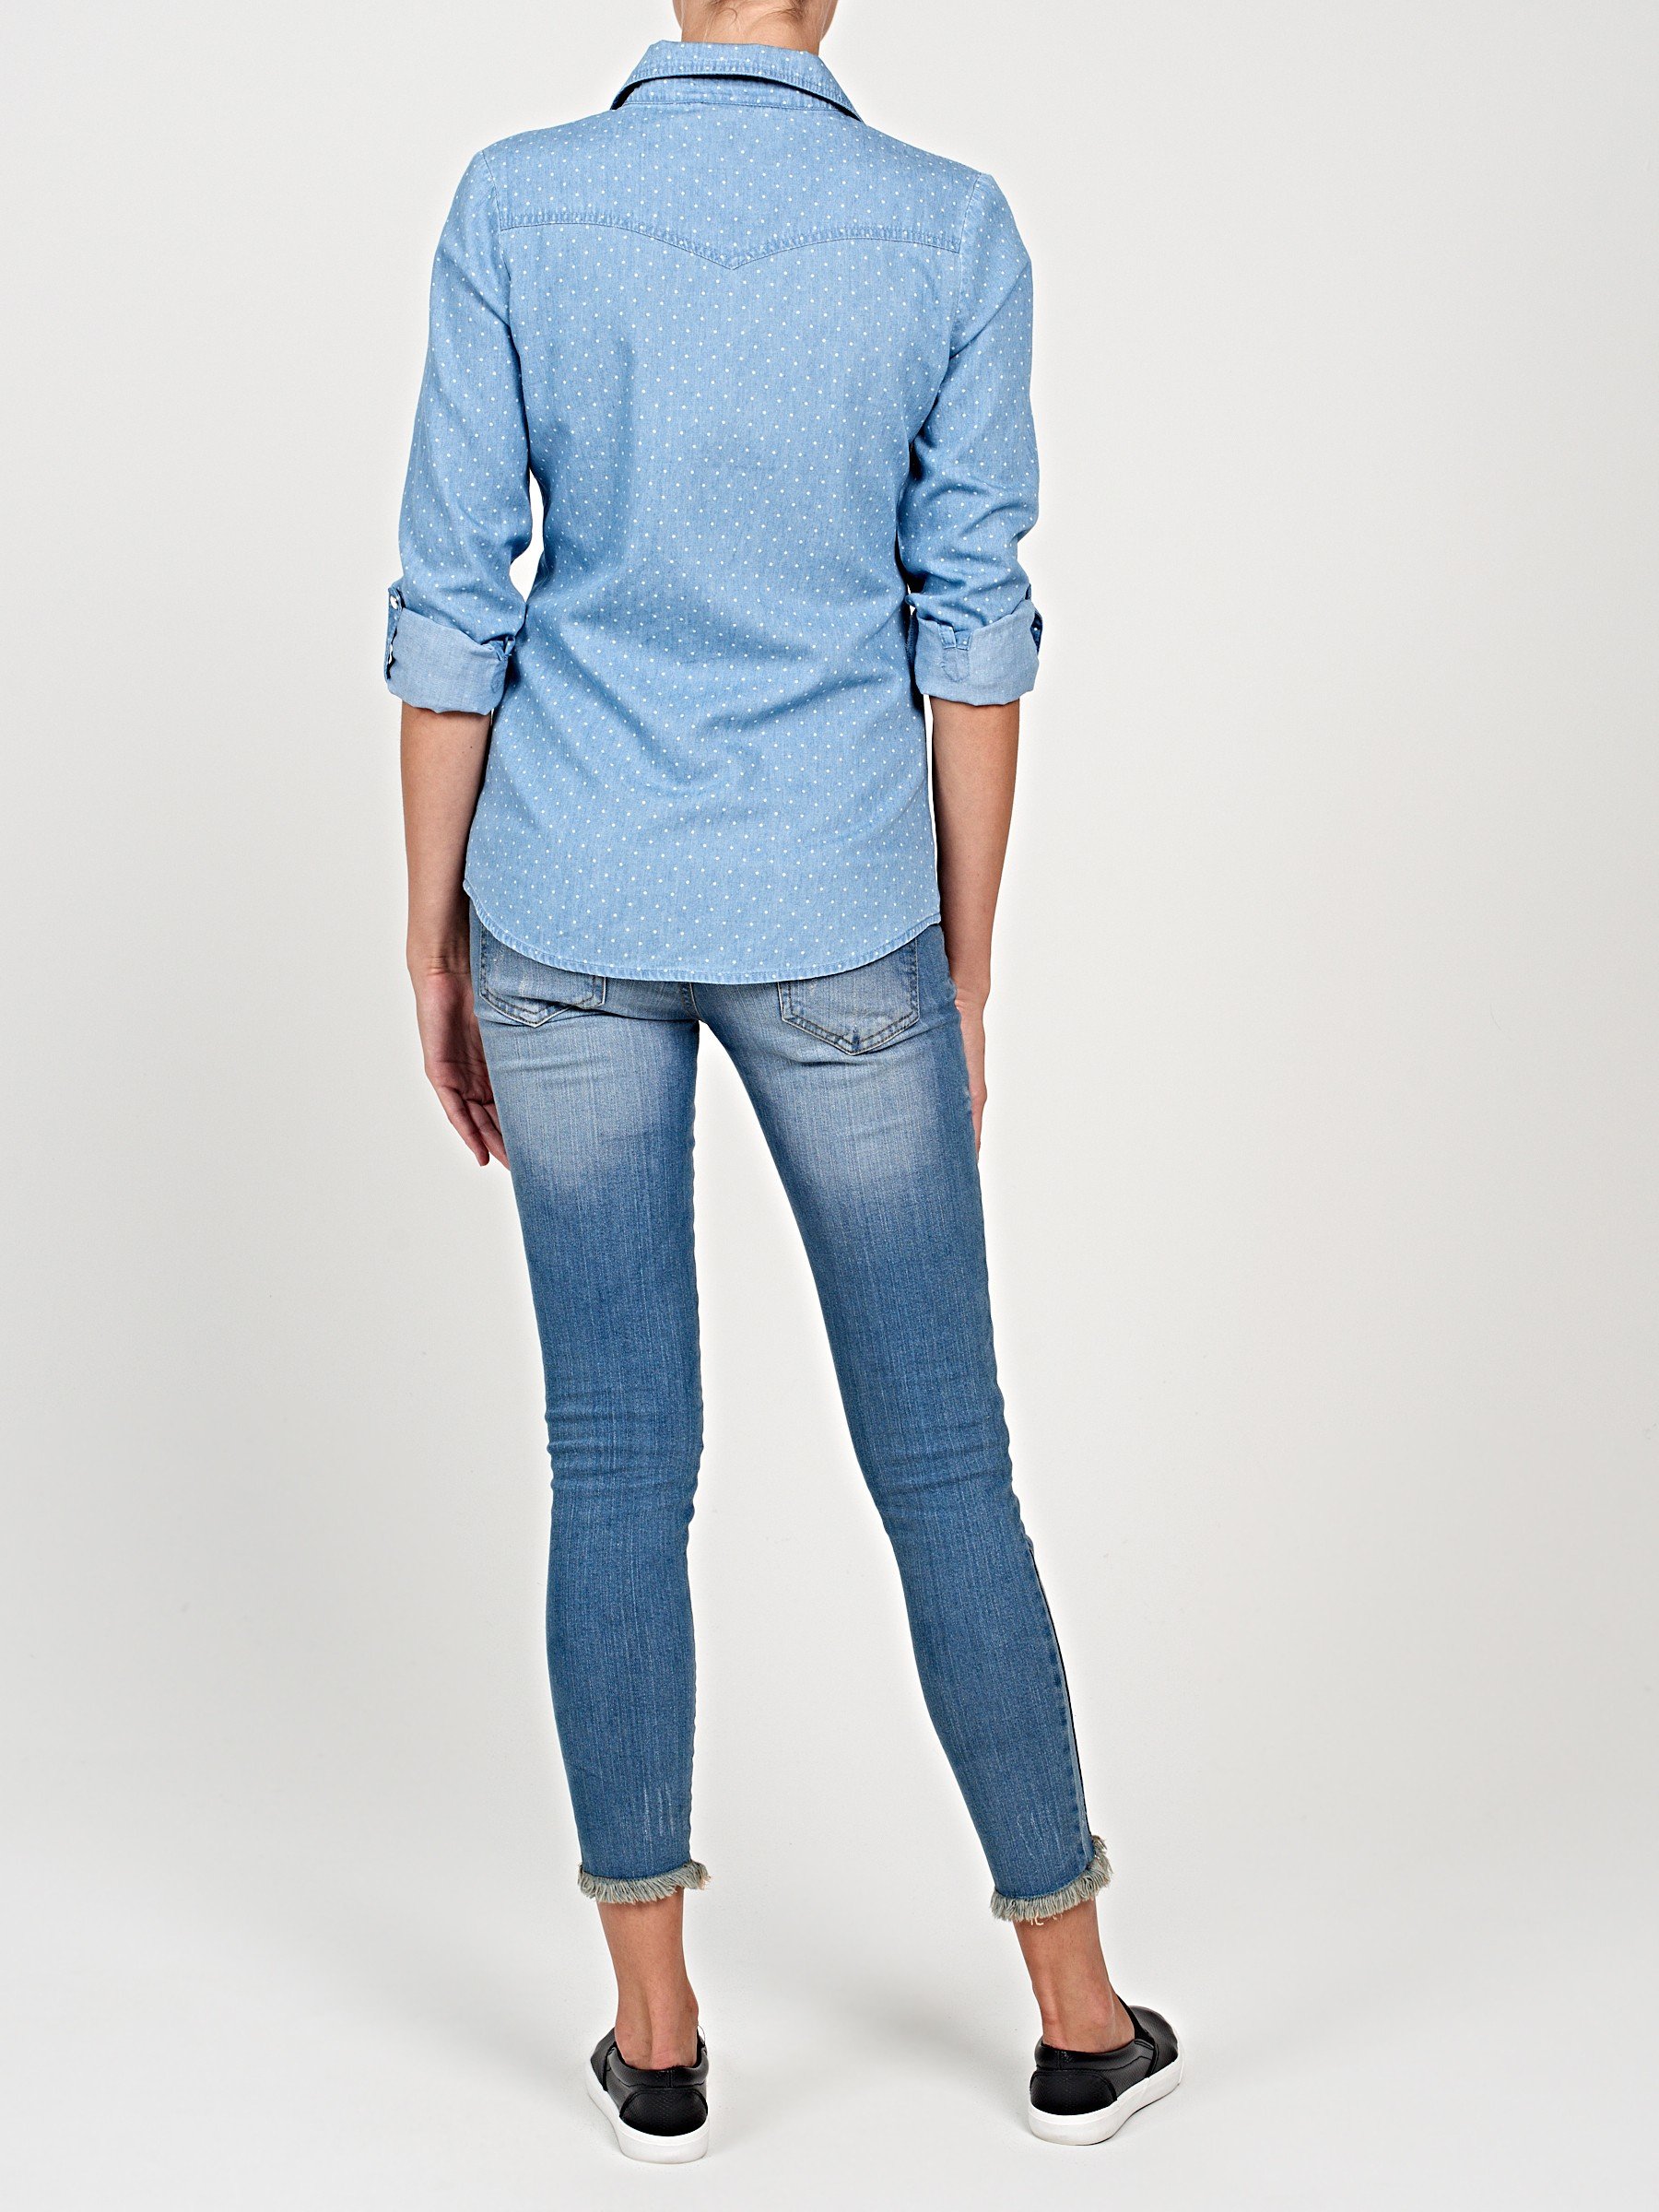 Buy DEAL JEANS Womens Collared Polka Dots Shirt | Shoppers Stop